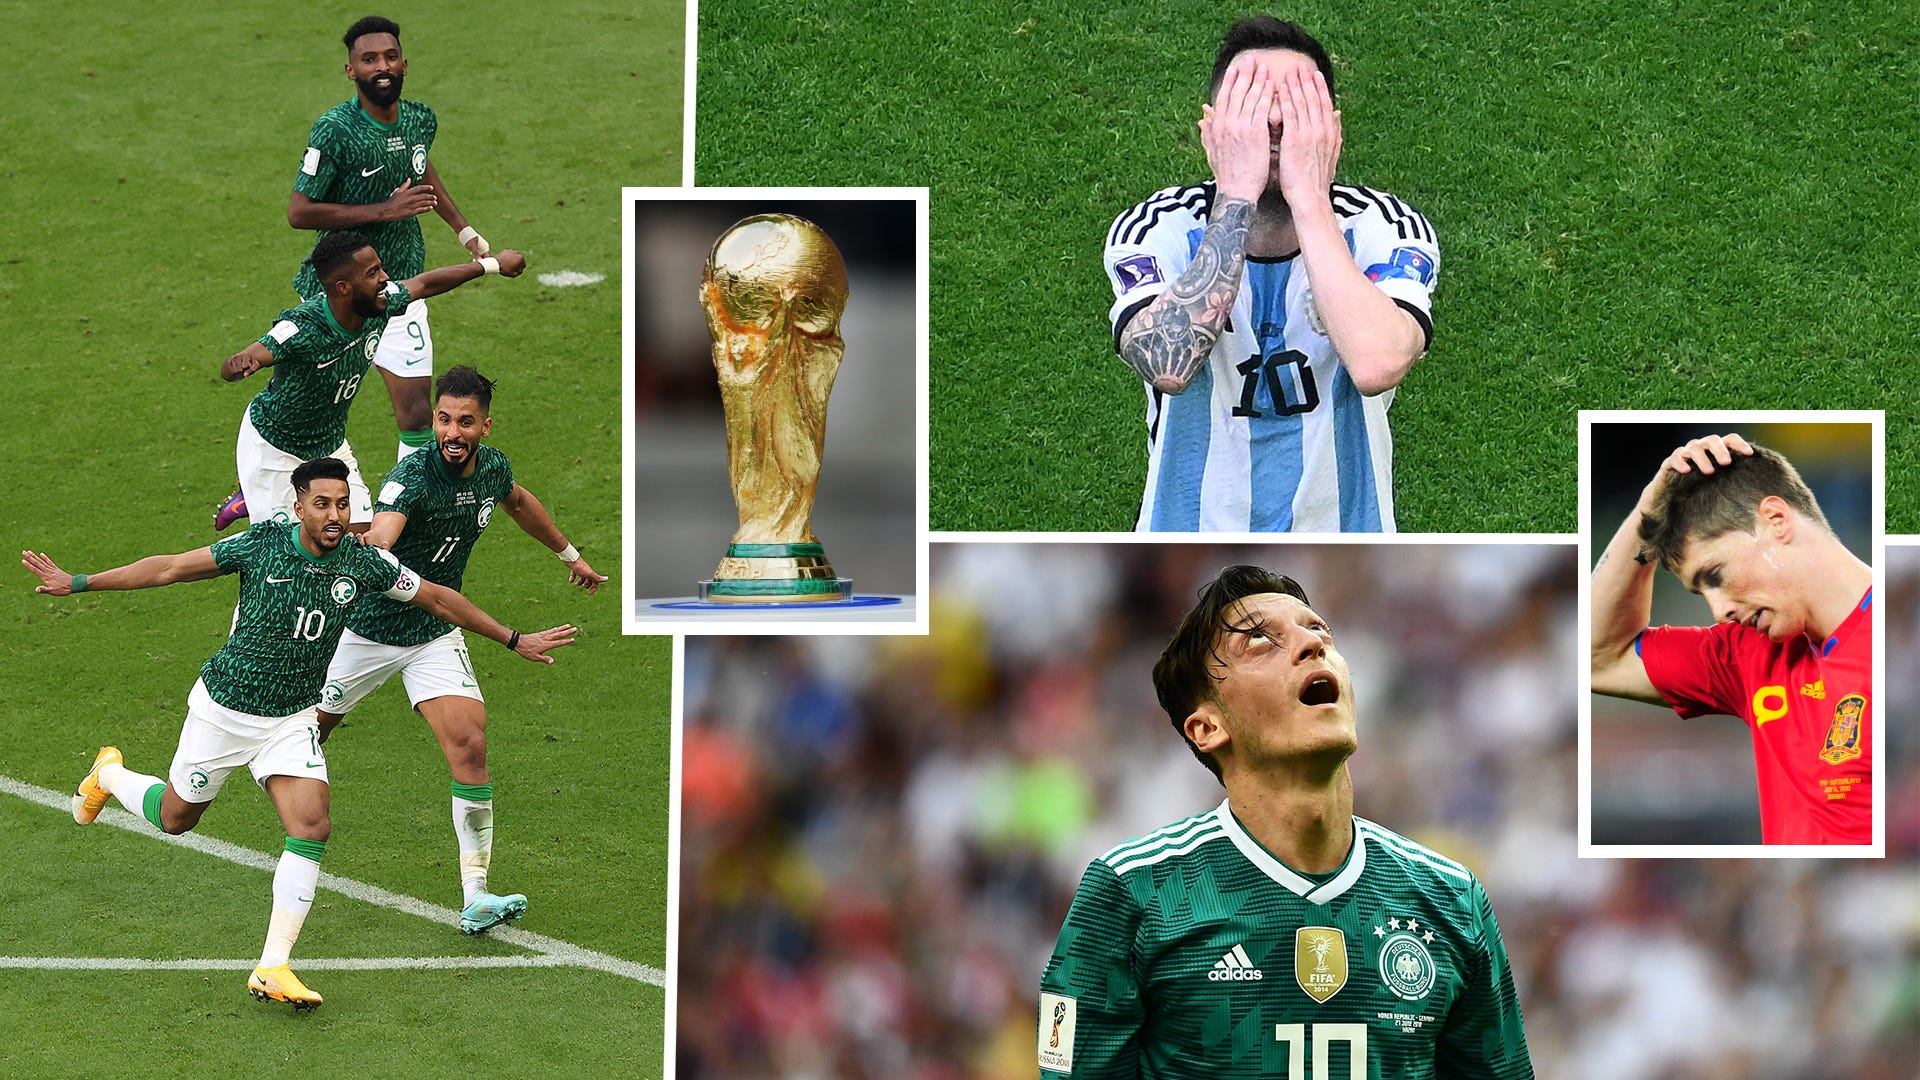 Japan turning over Germany, Saudi Arabia dismantling Messi & Argentina - it's the biggest World Cup upsets of all time - Goal.co